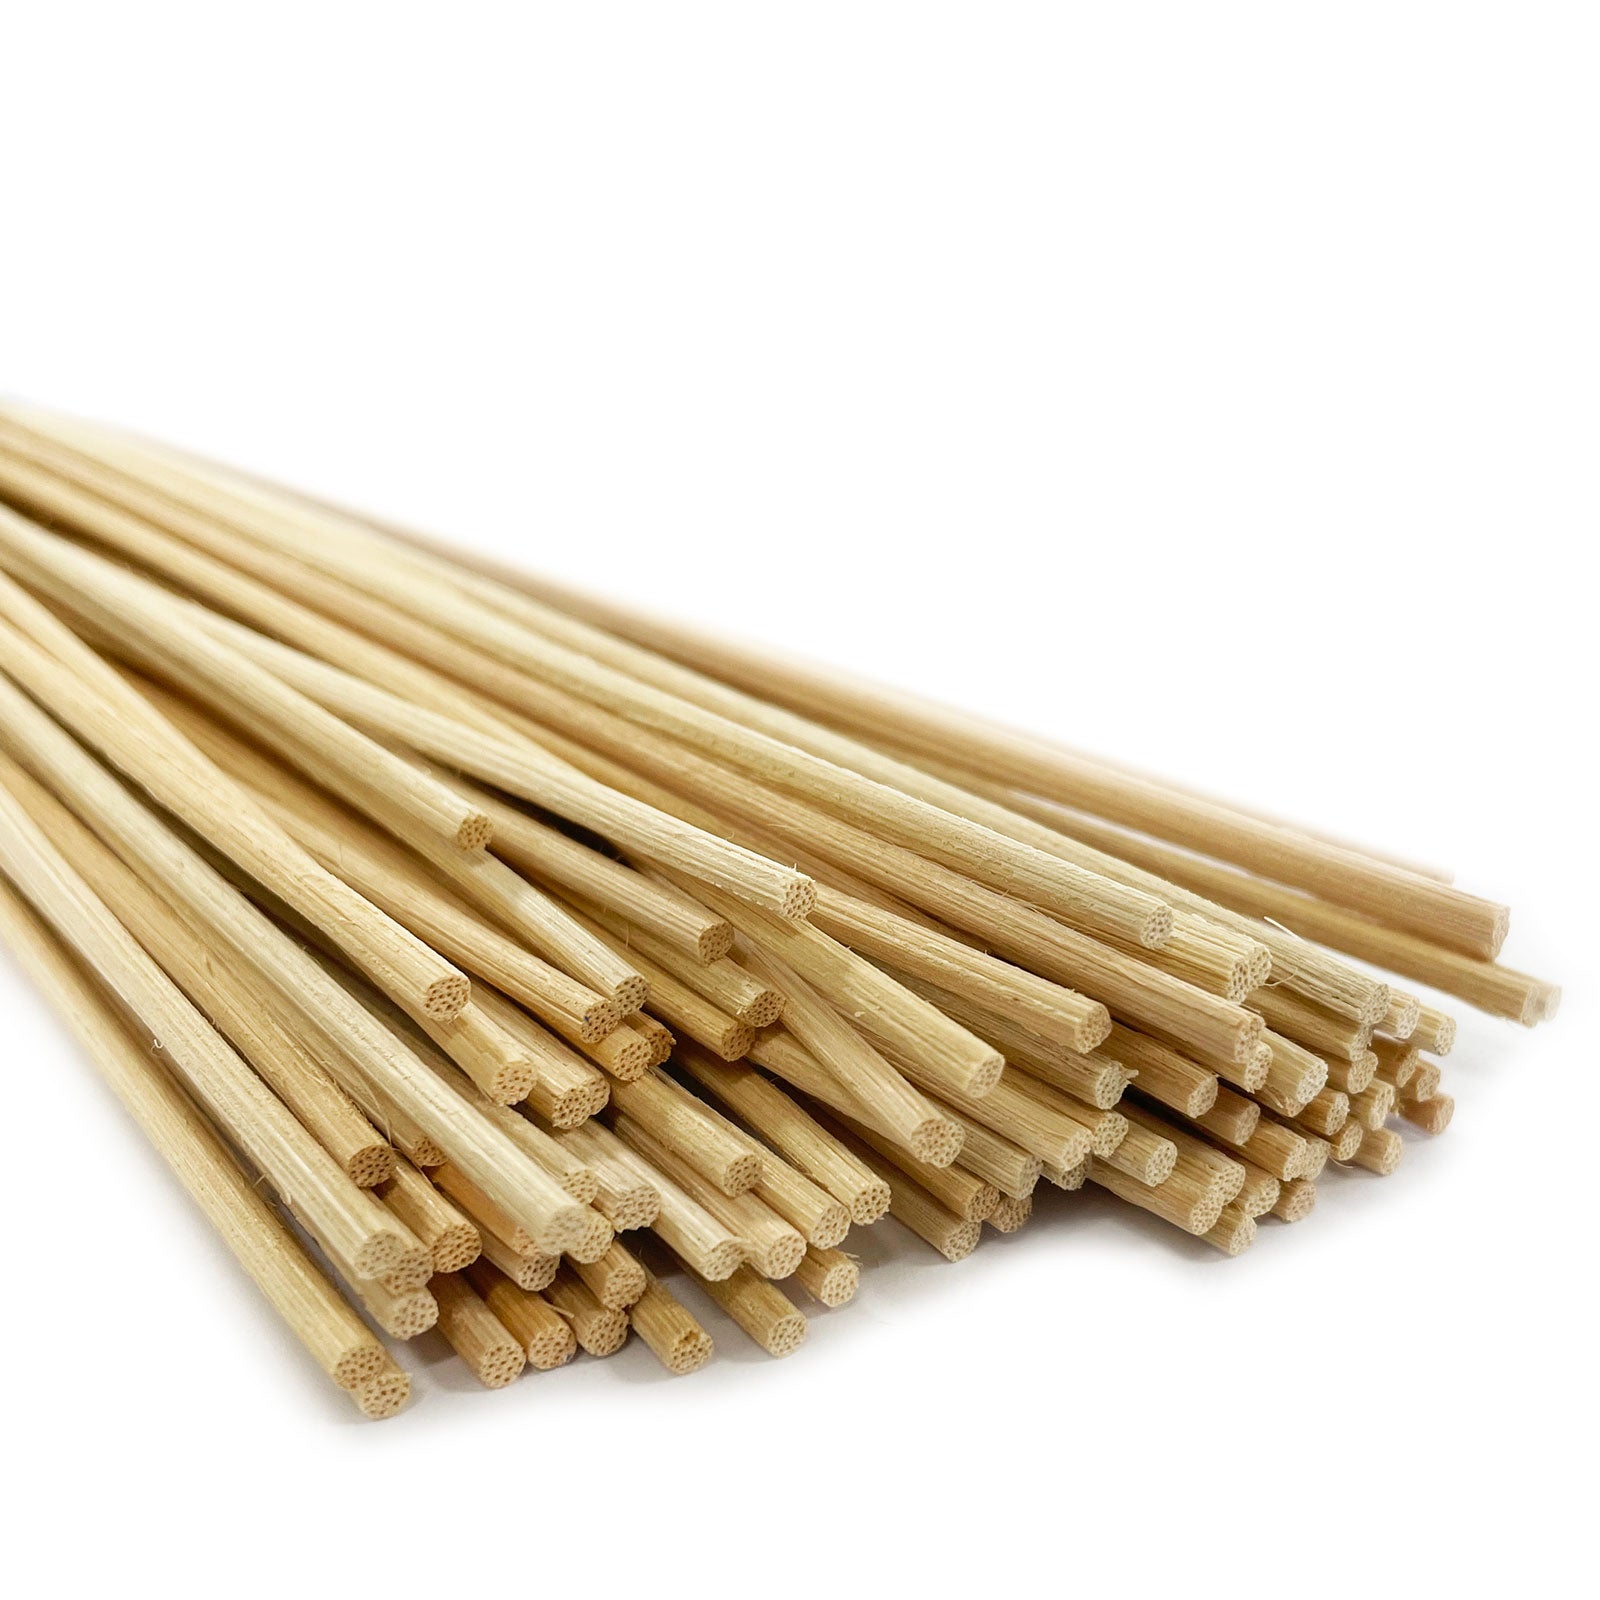 View Pack of 25mm Indonesia Reed Diffuser Sticks Approx 100 Sticks information